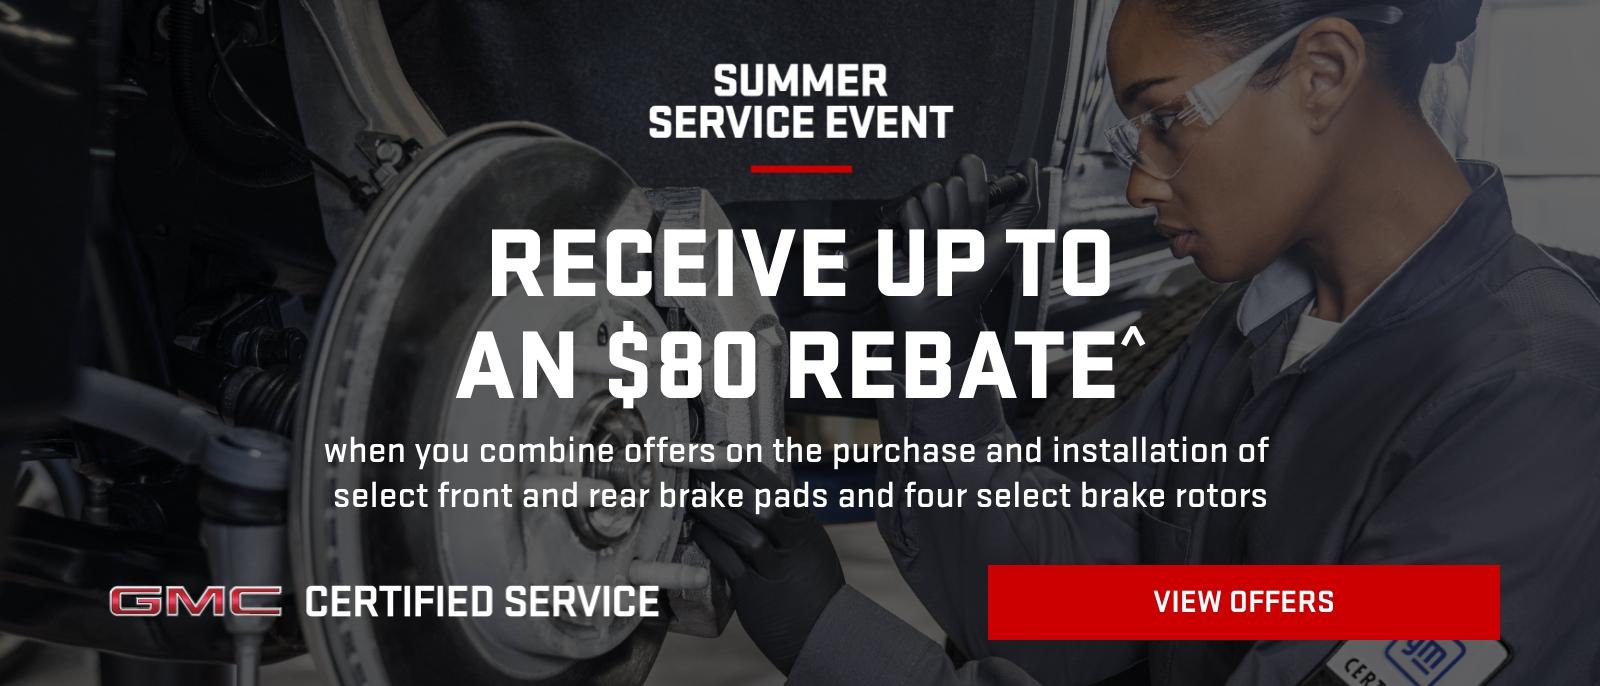 Receive up to an $80 rebate on brakes